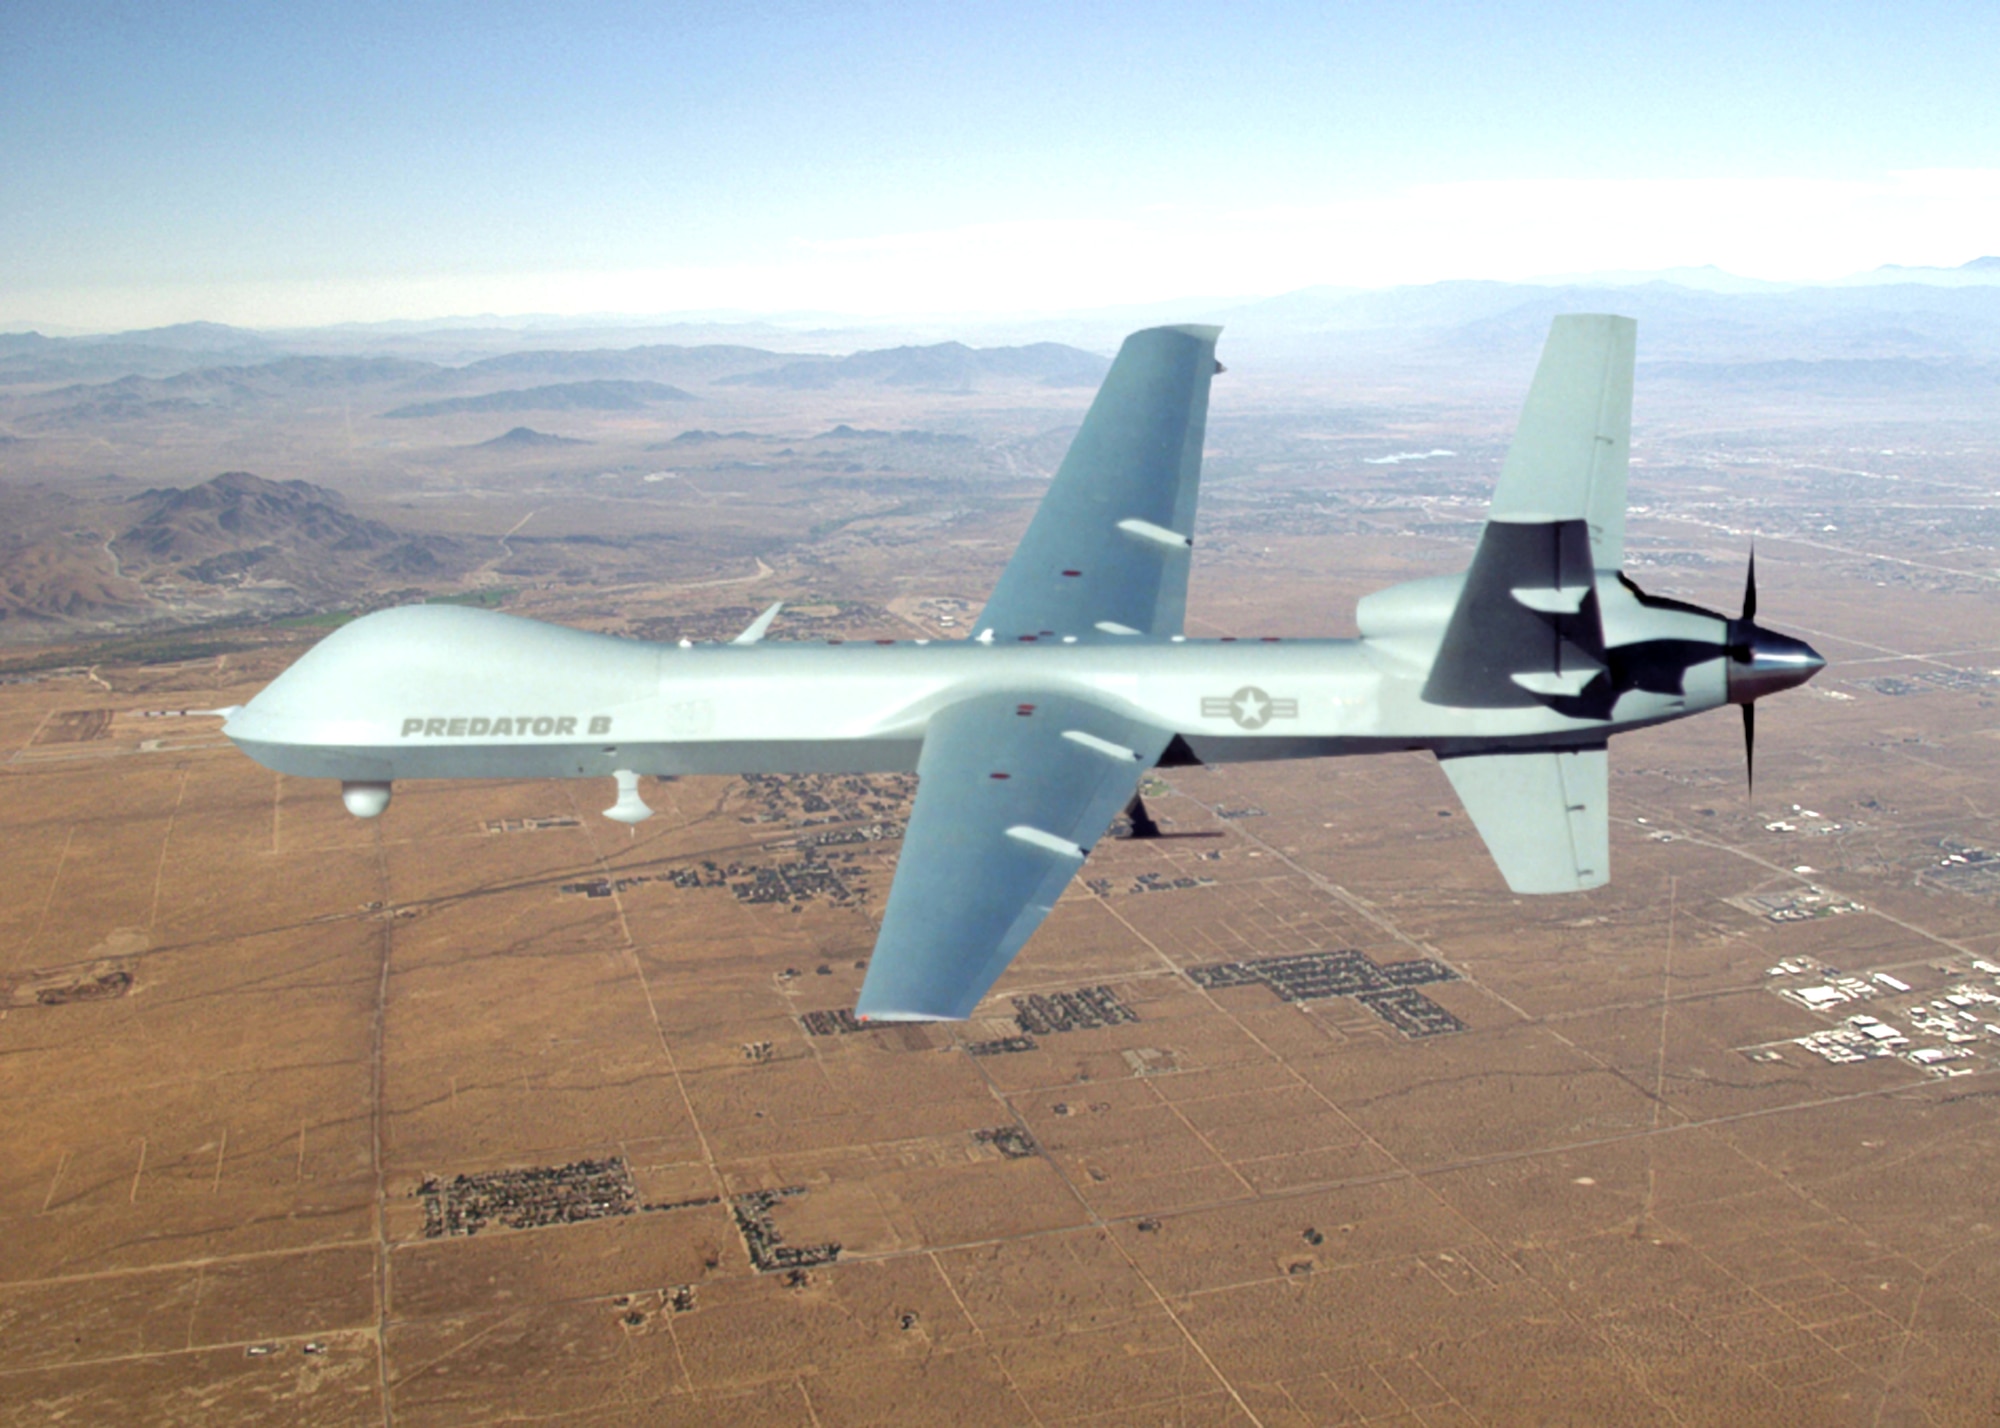 Reaper' Moniker Given To MQ 9 Unmanned Aerial Vehicle > Air Force > Article Display